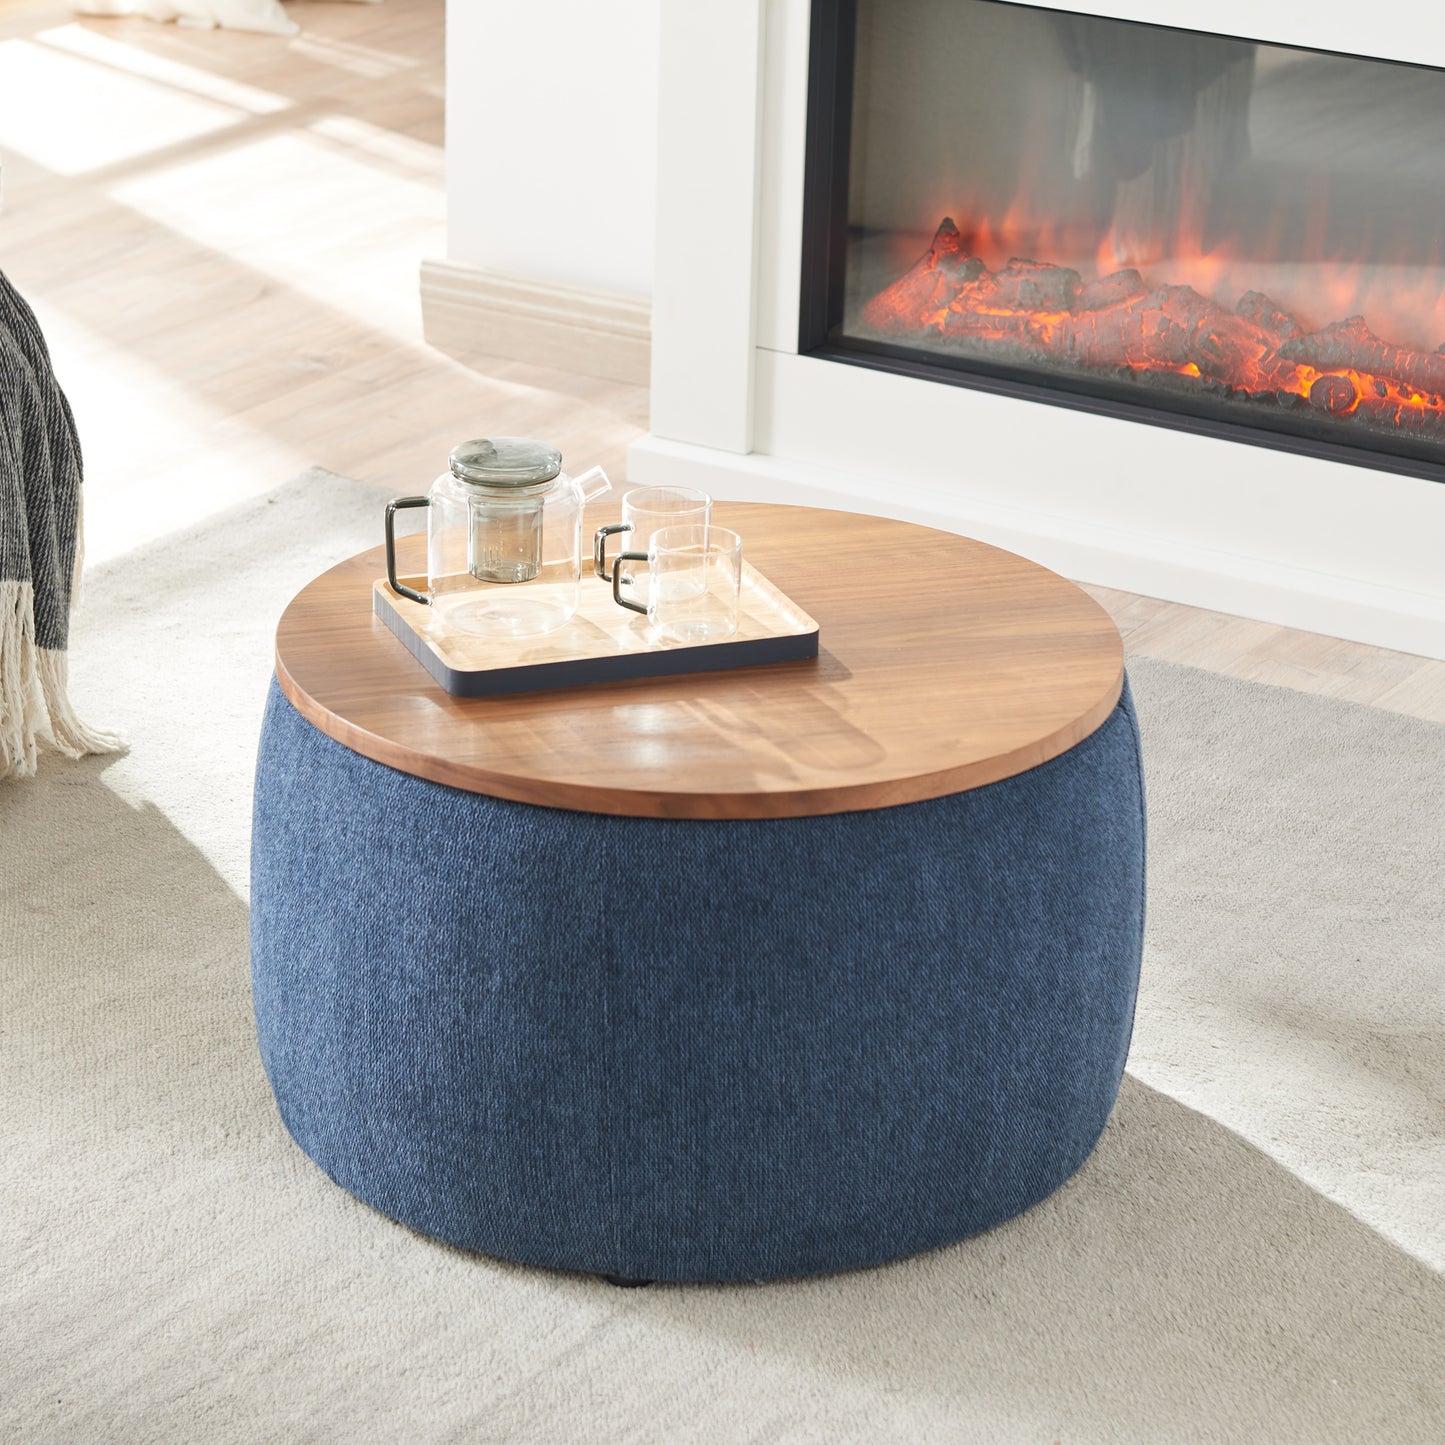 Storage Ottoman with Tray, Round Ottoman Coffee Table Handmade with Storage, Cube Organizer, End Table for Living Room, LJ423